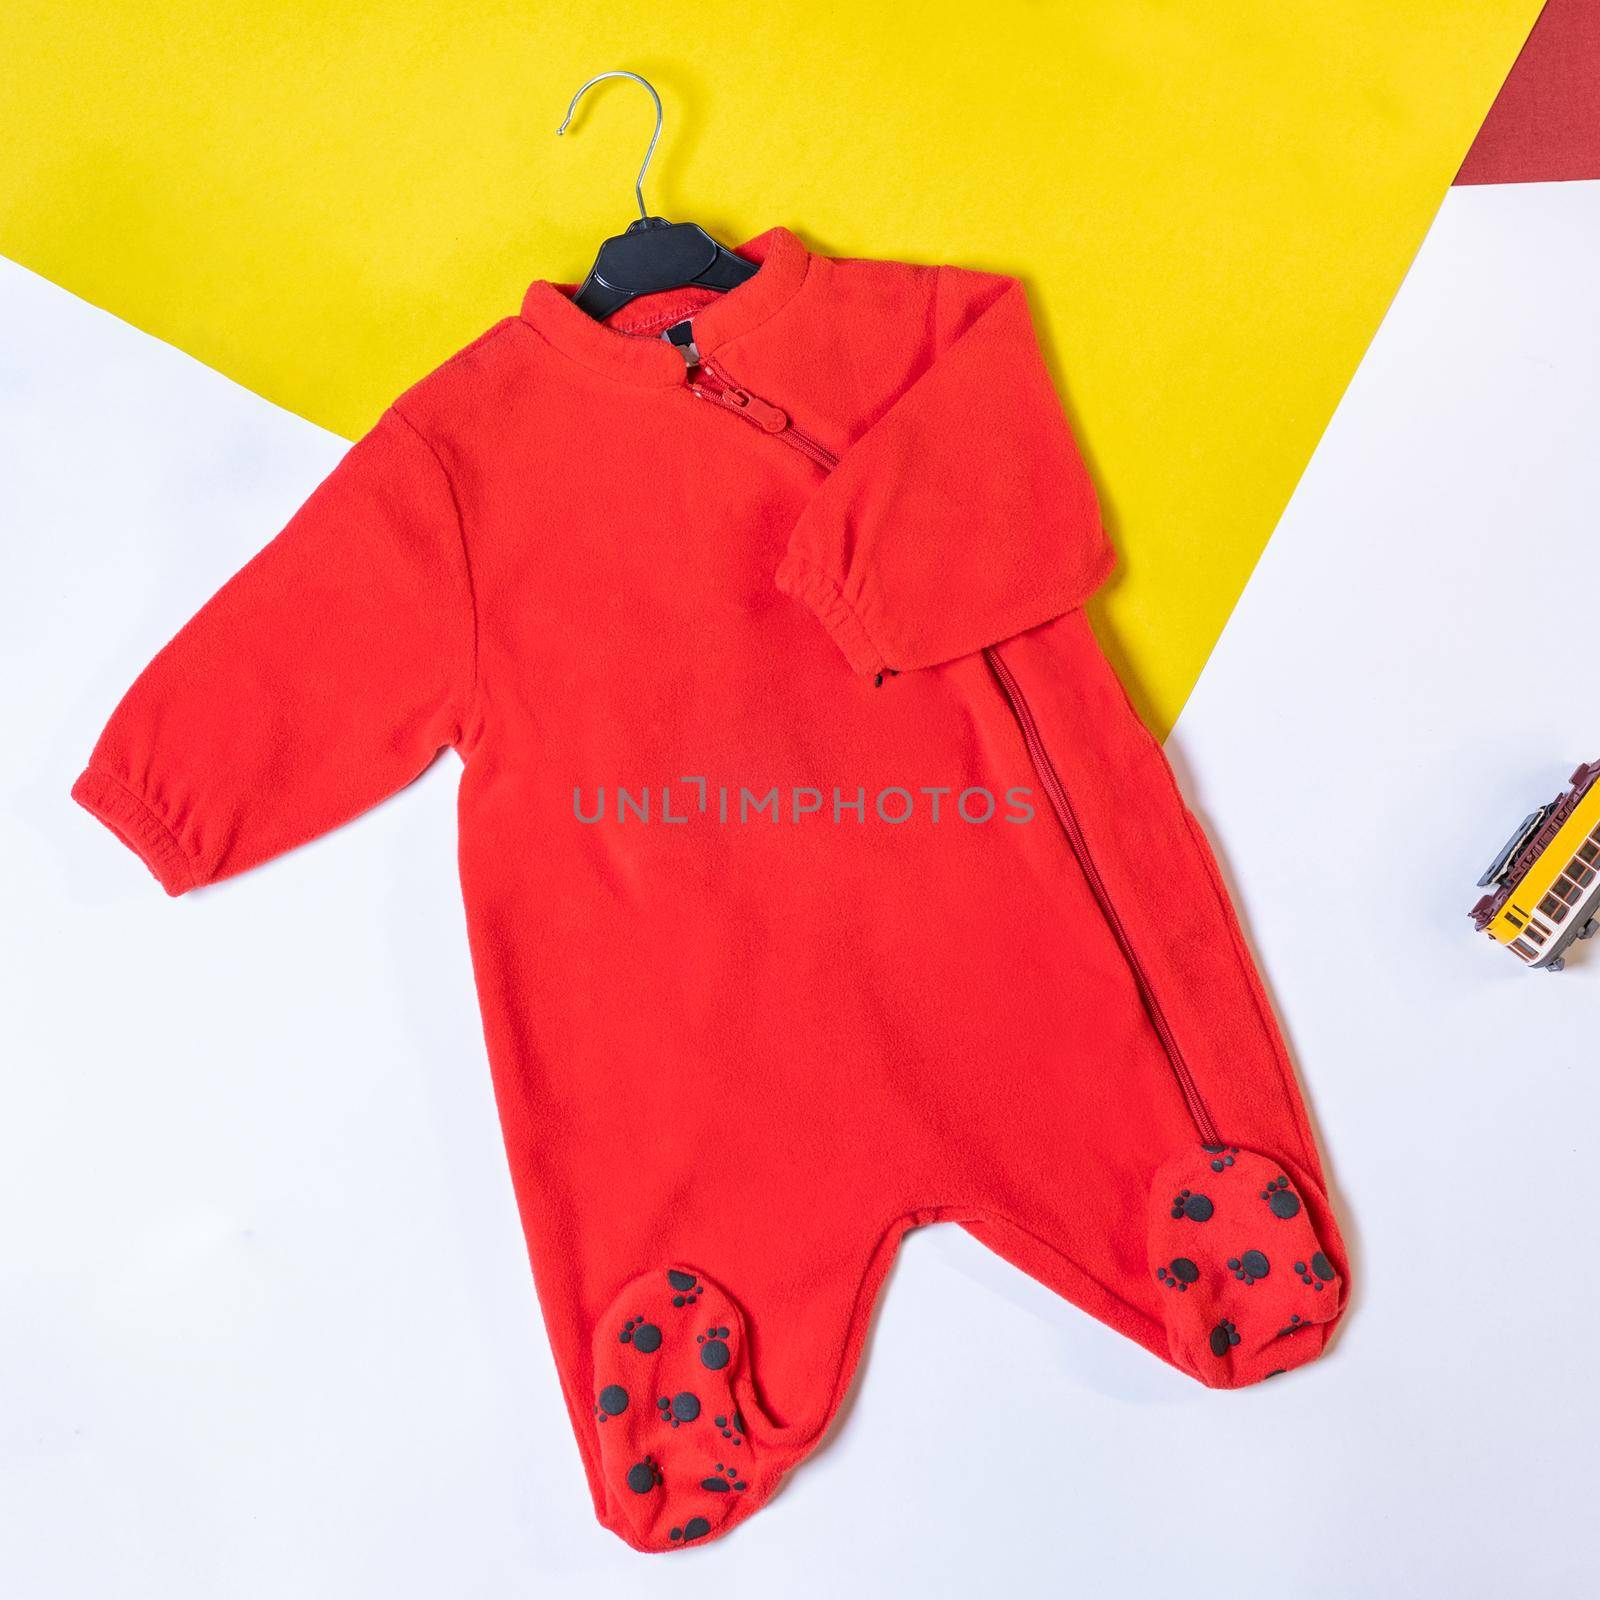 Kids red sports suit isolated on colorful background by ferhad